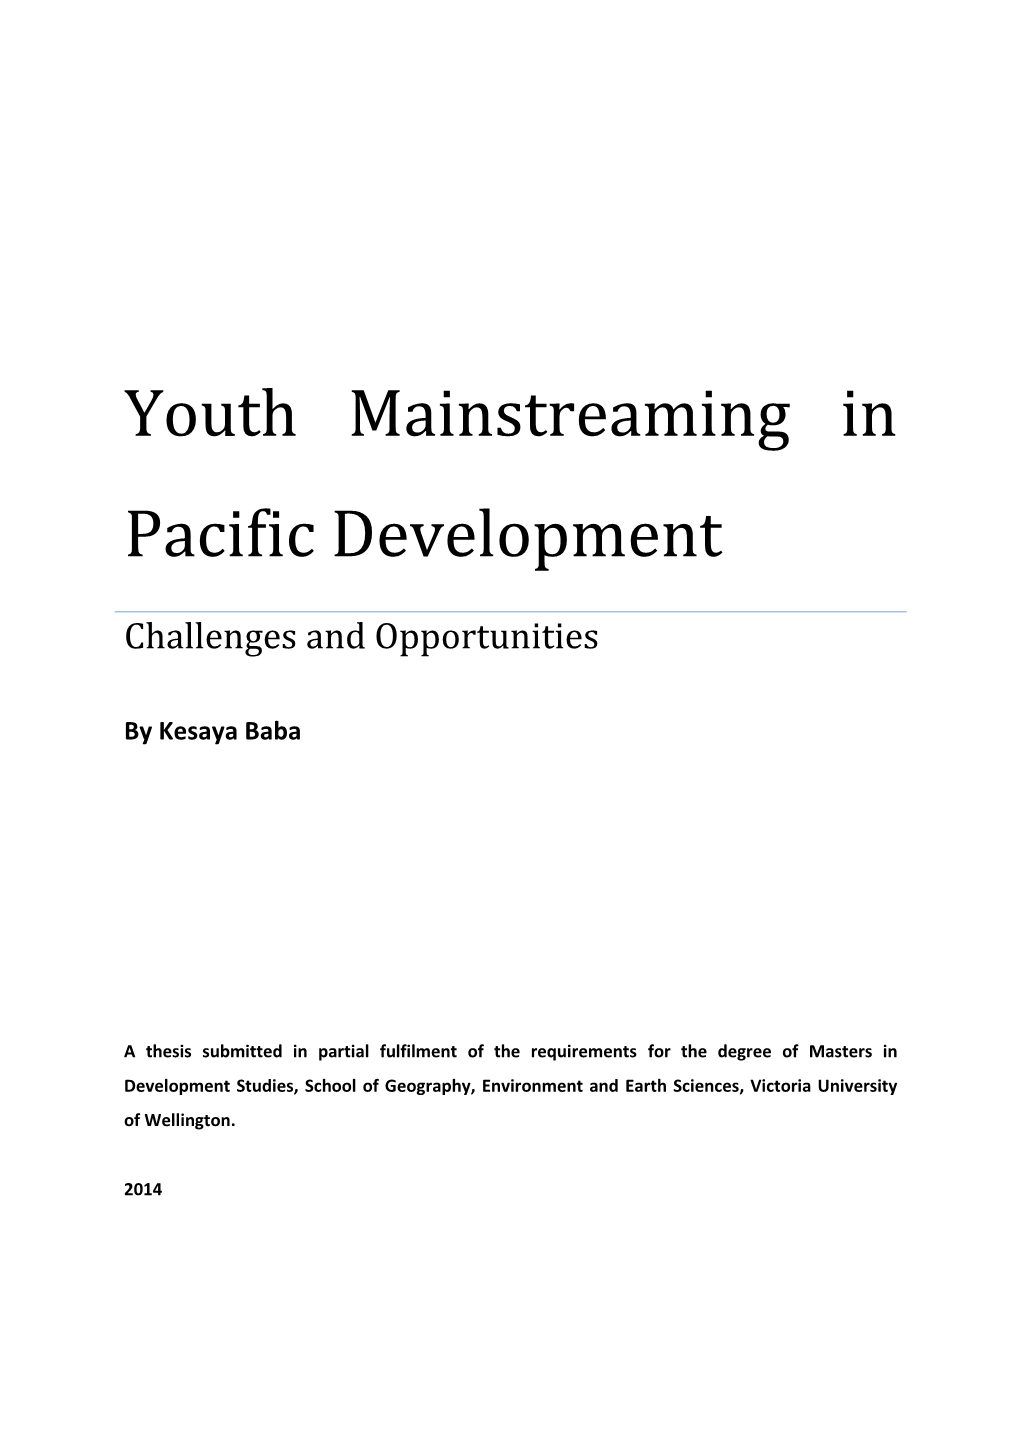 Youth Mainstreaming in Pacific Development